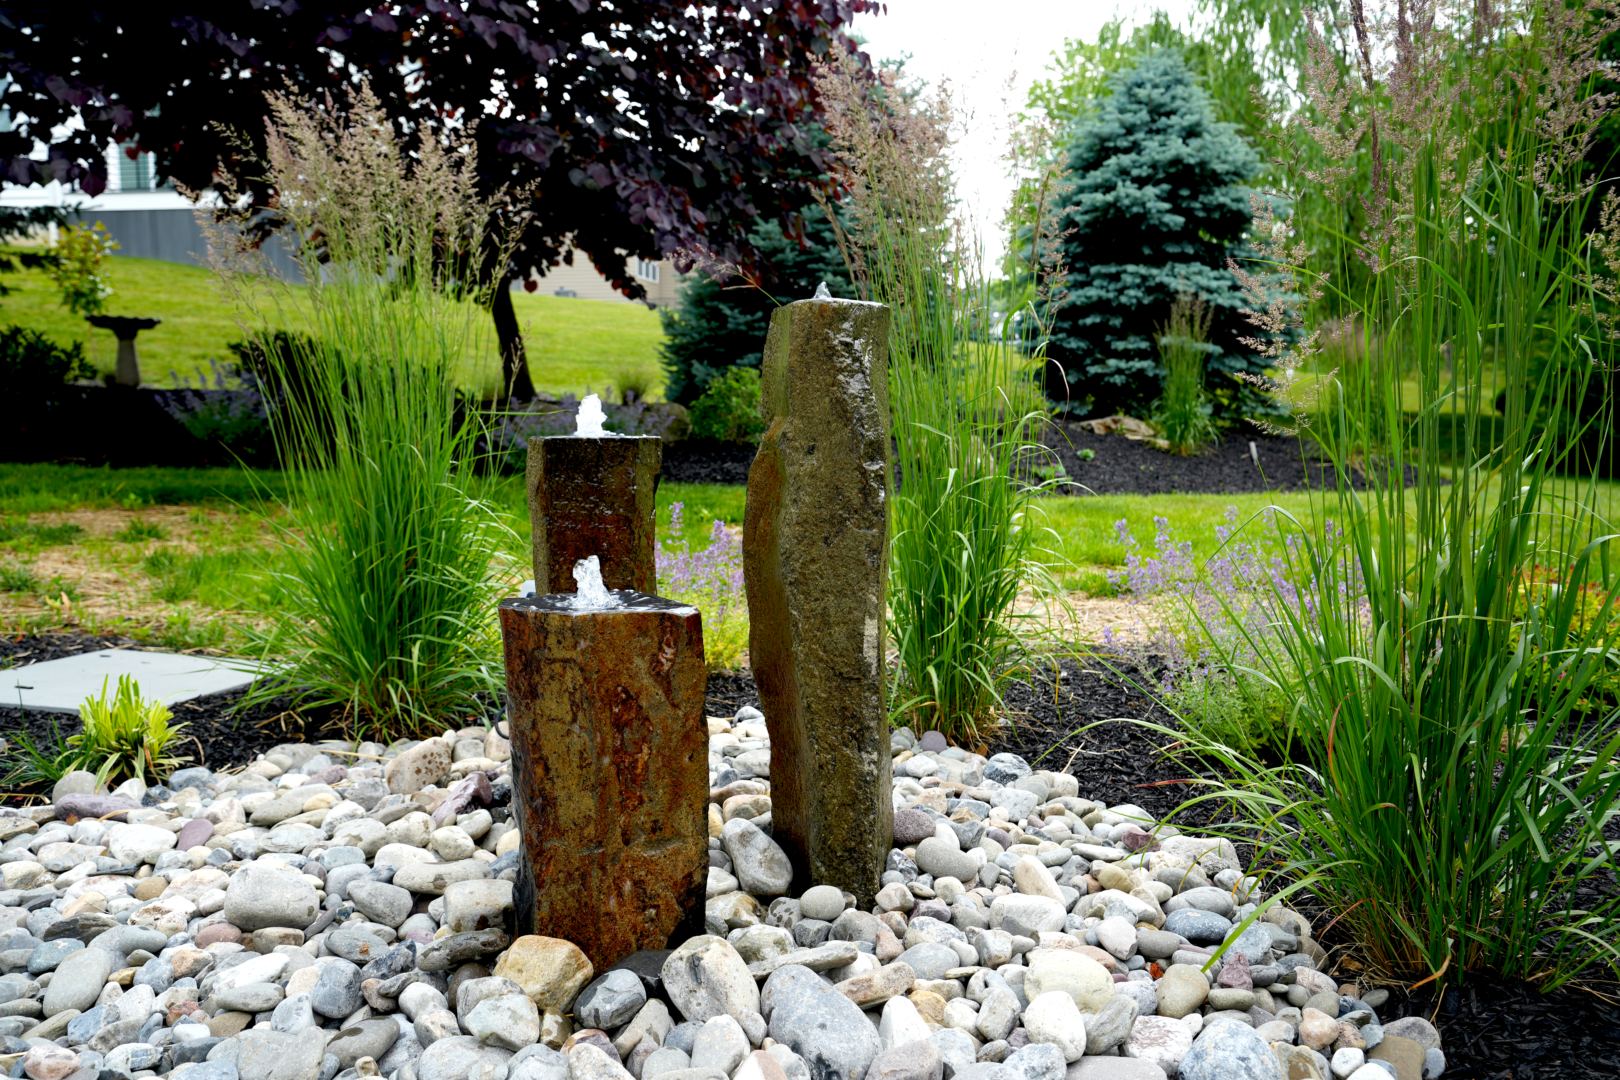 The garden boasts a stunning water fountain as one of its key water features.